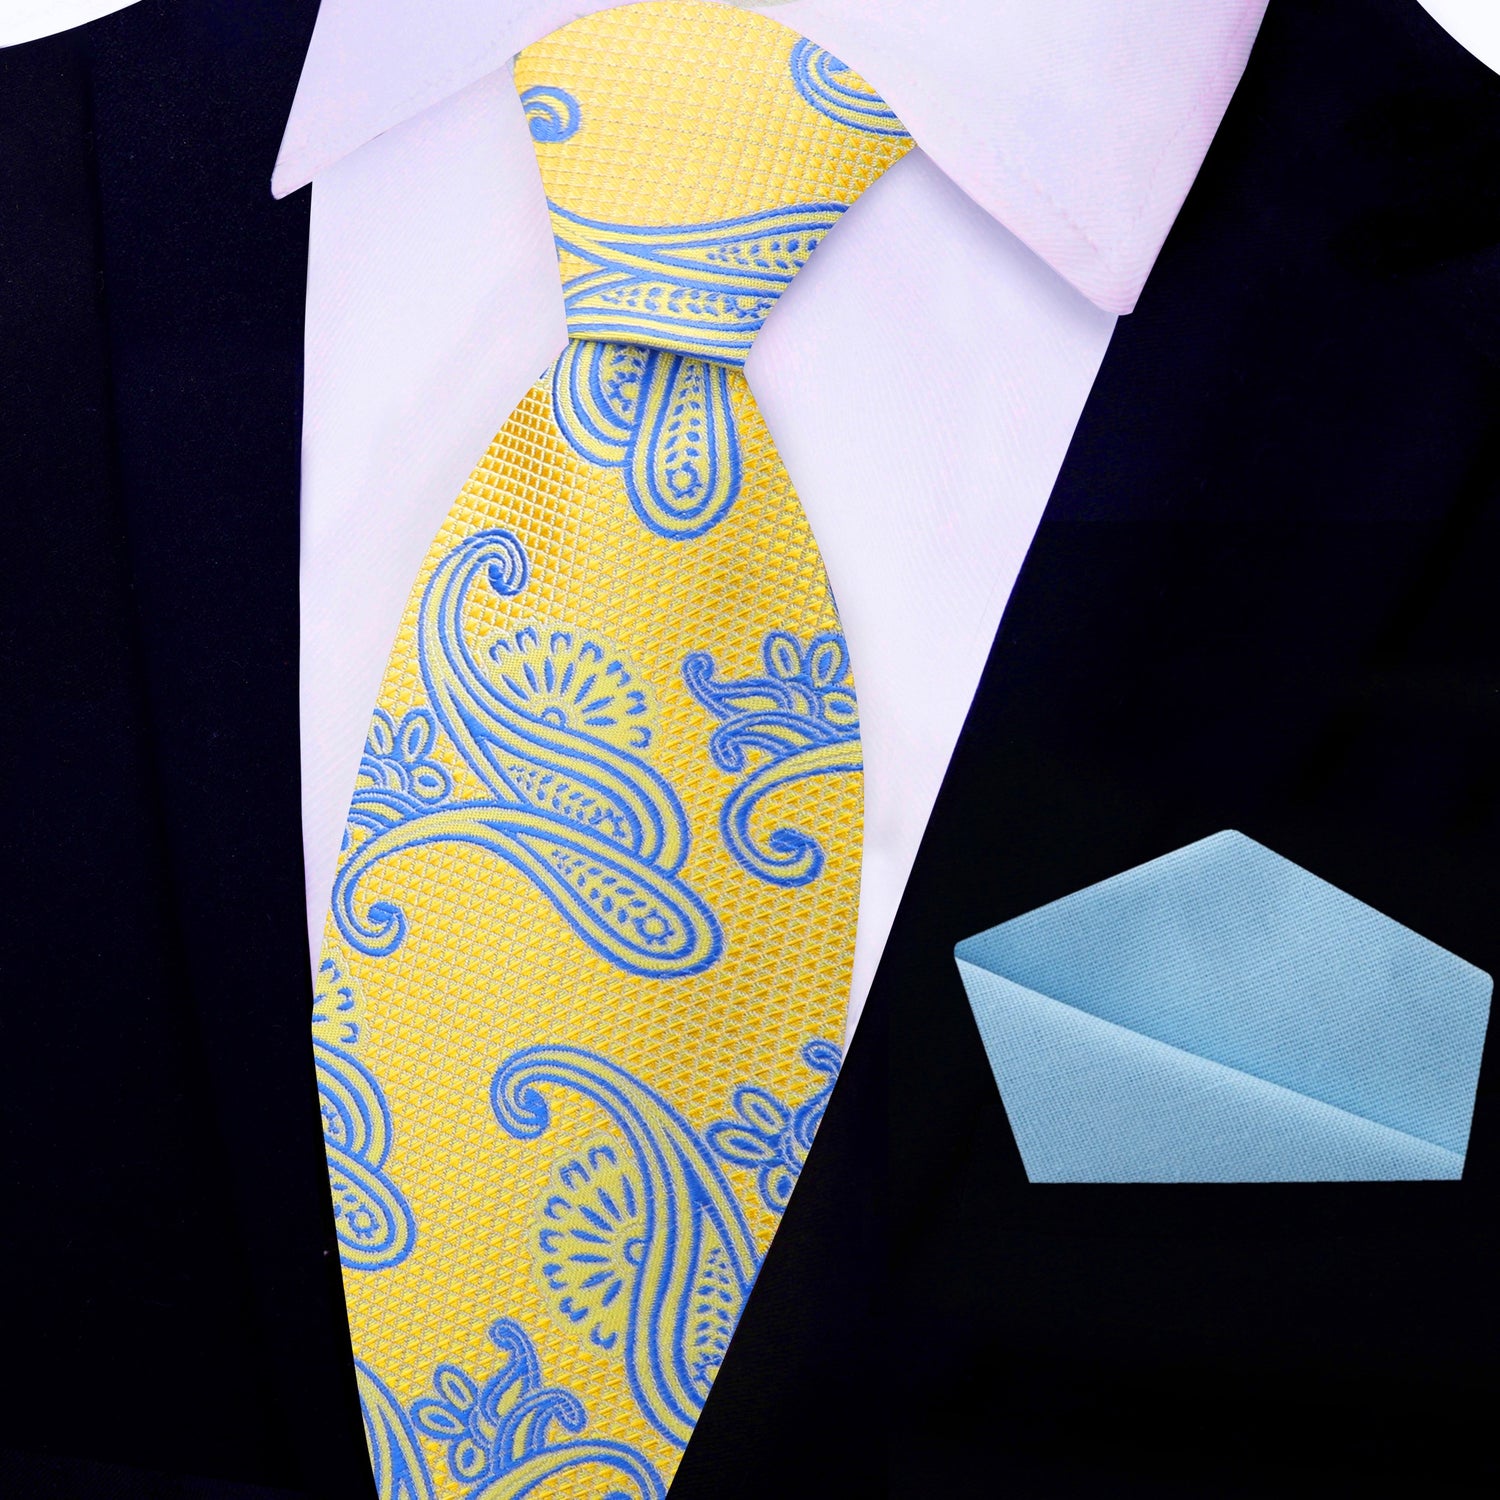 View 2: Yellow and Light Blue Paisley Tie and Light Blue Square